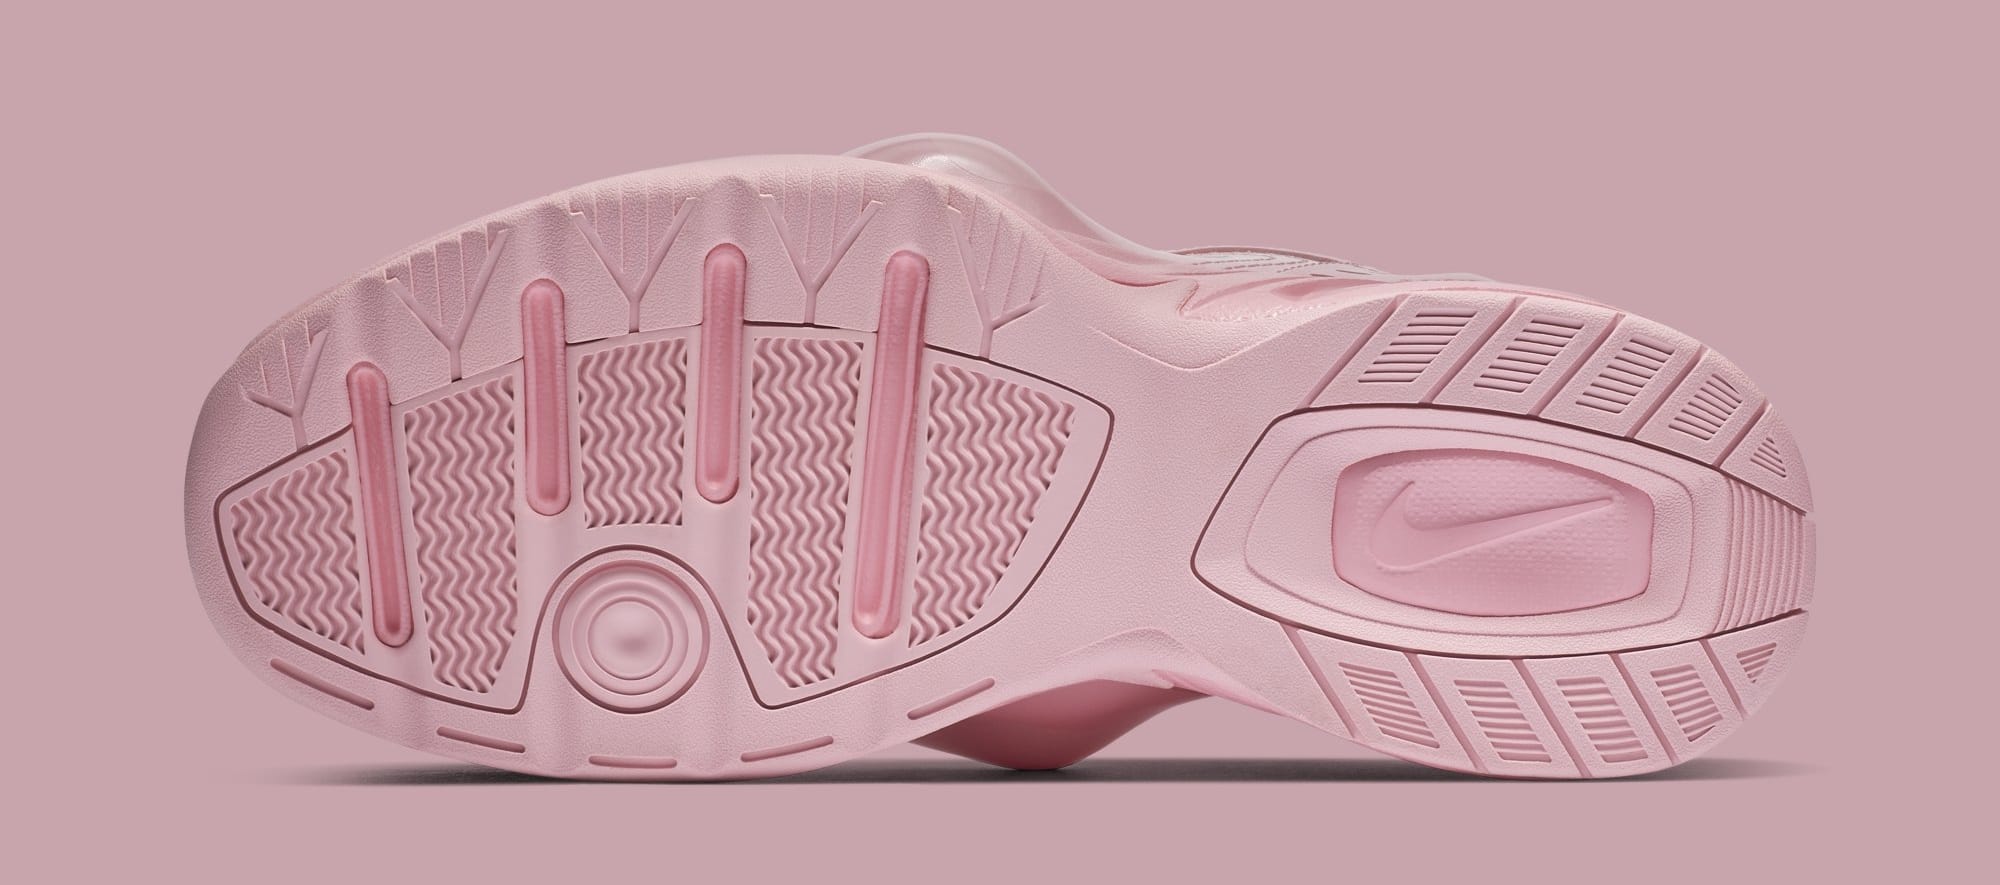 Martine Rose's Remixed Air Monarch 4s Are Releasing Soon